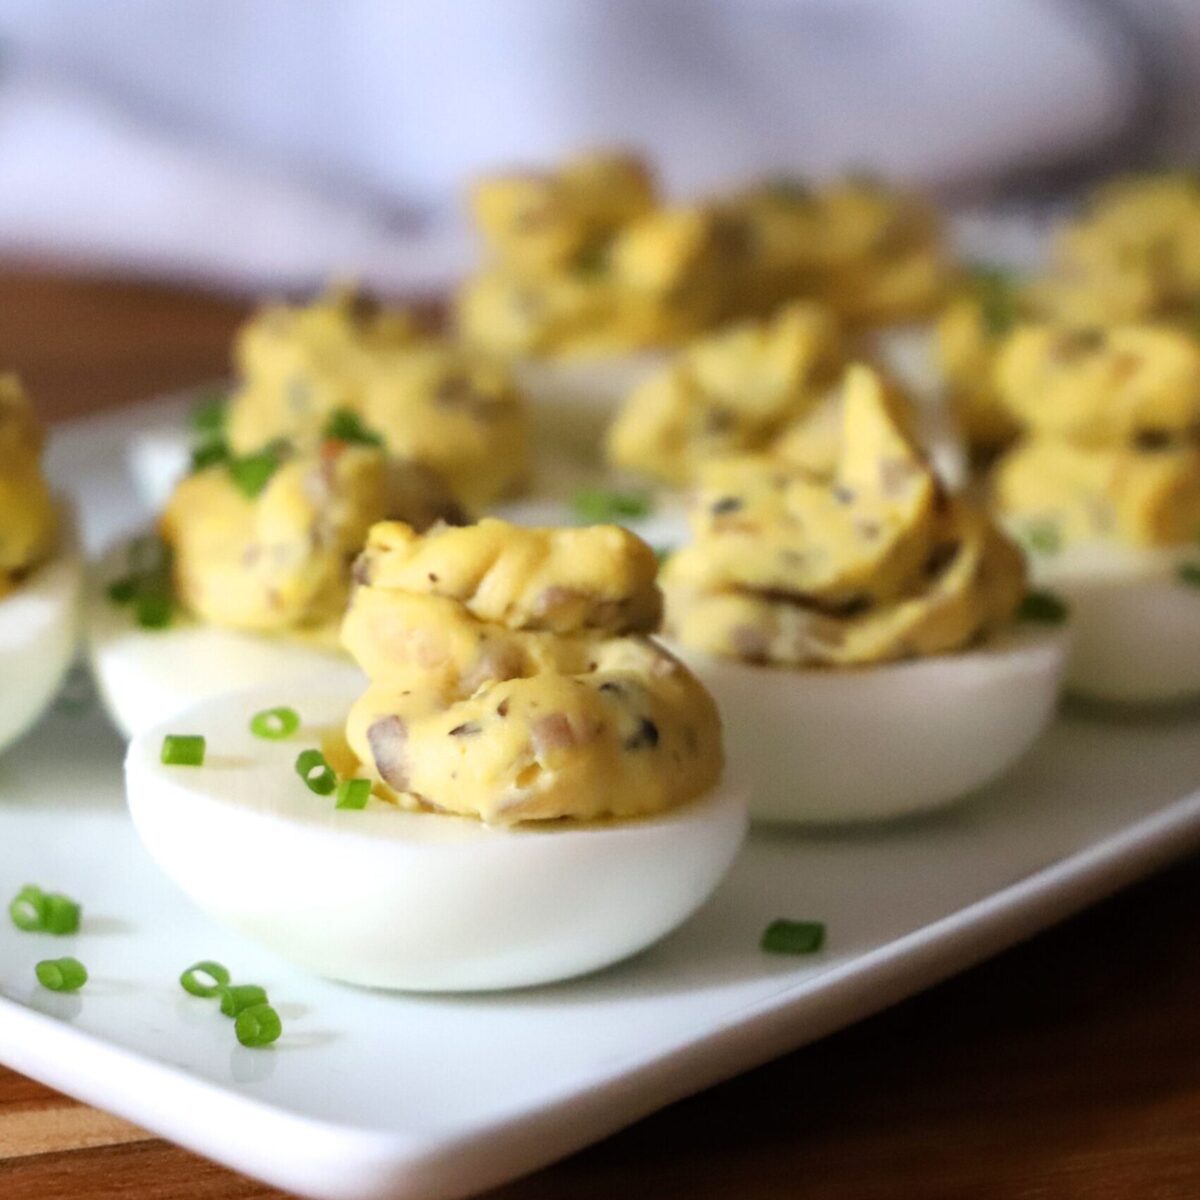 Deviled Eggs with Mushrooms on a plate